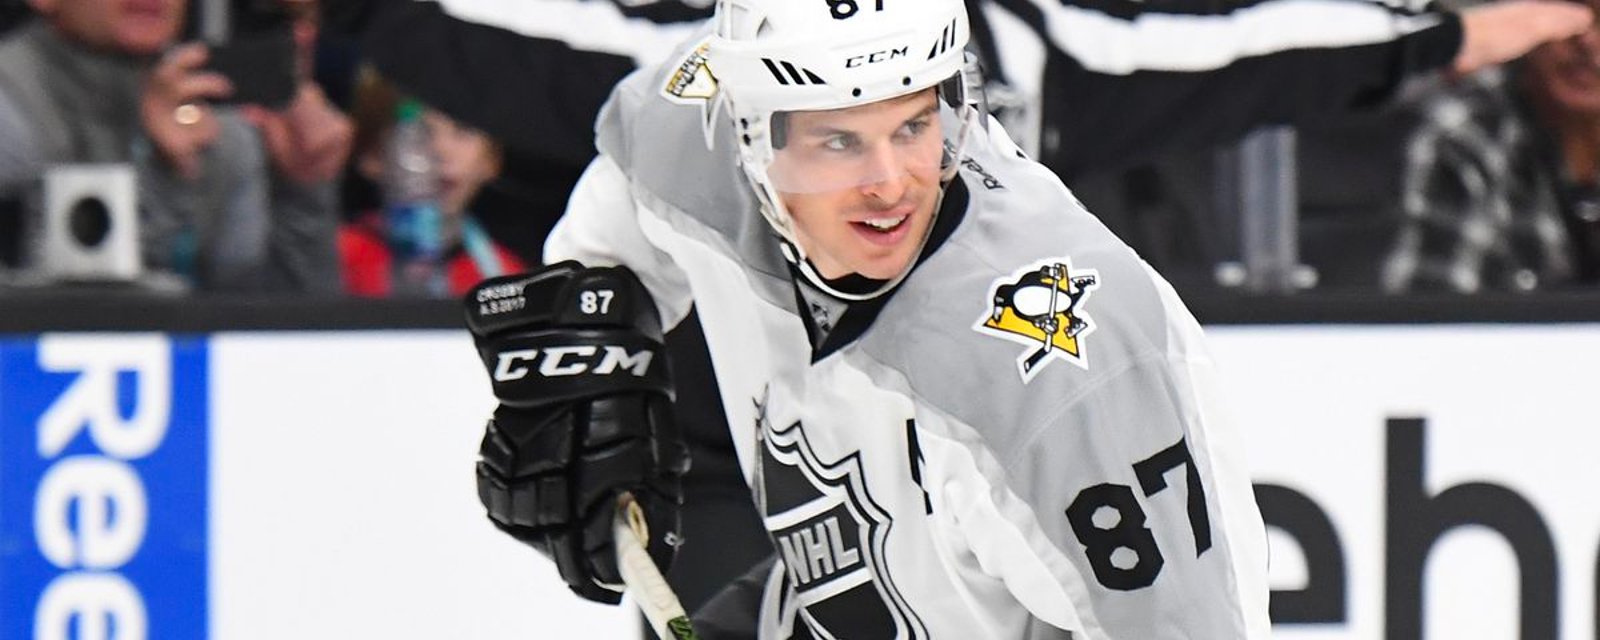 Real reason why Sidney Crosby missed All-Star Draft revealed